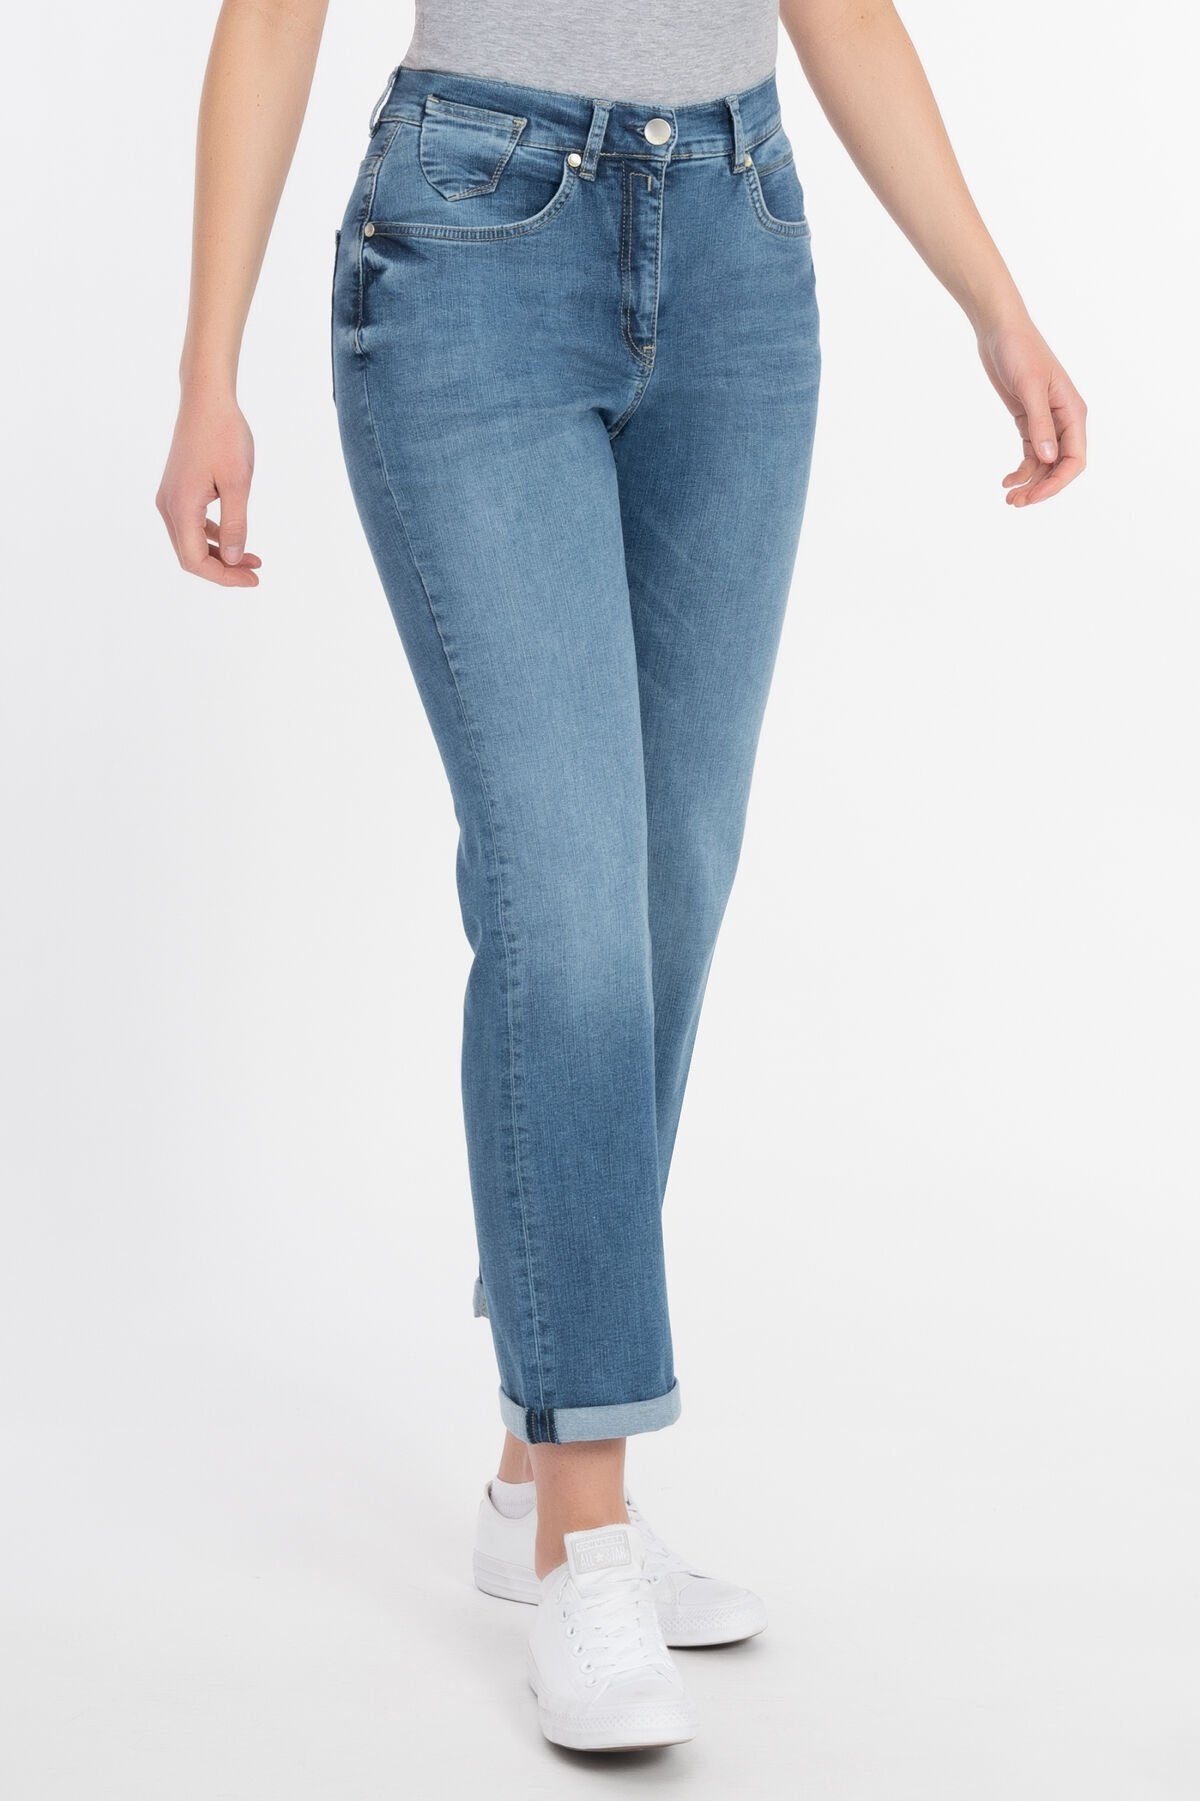 Recover Pants 5-Pocket-Jeans Hazel in Waschung authentischer